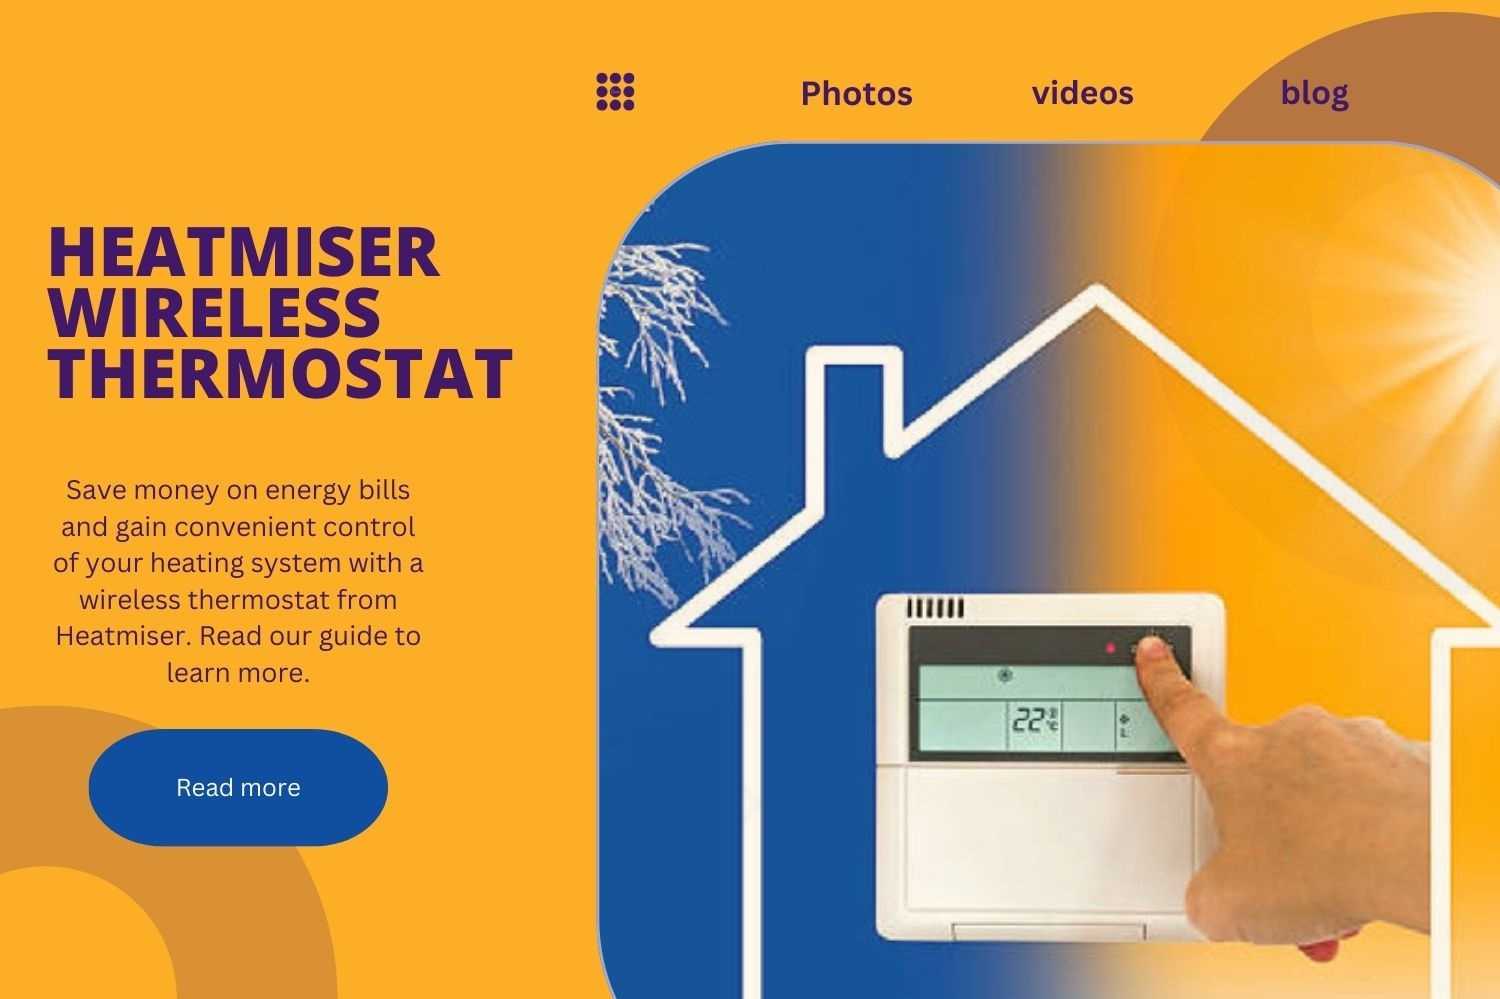 Heatmiser Wireless Thermostat: Convenient Temperature Control for Modern Homes